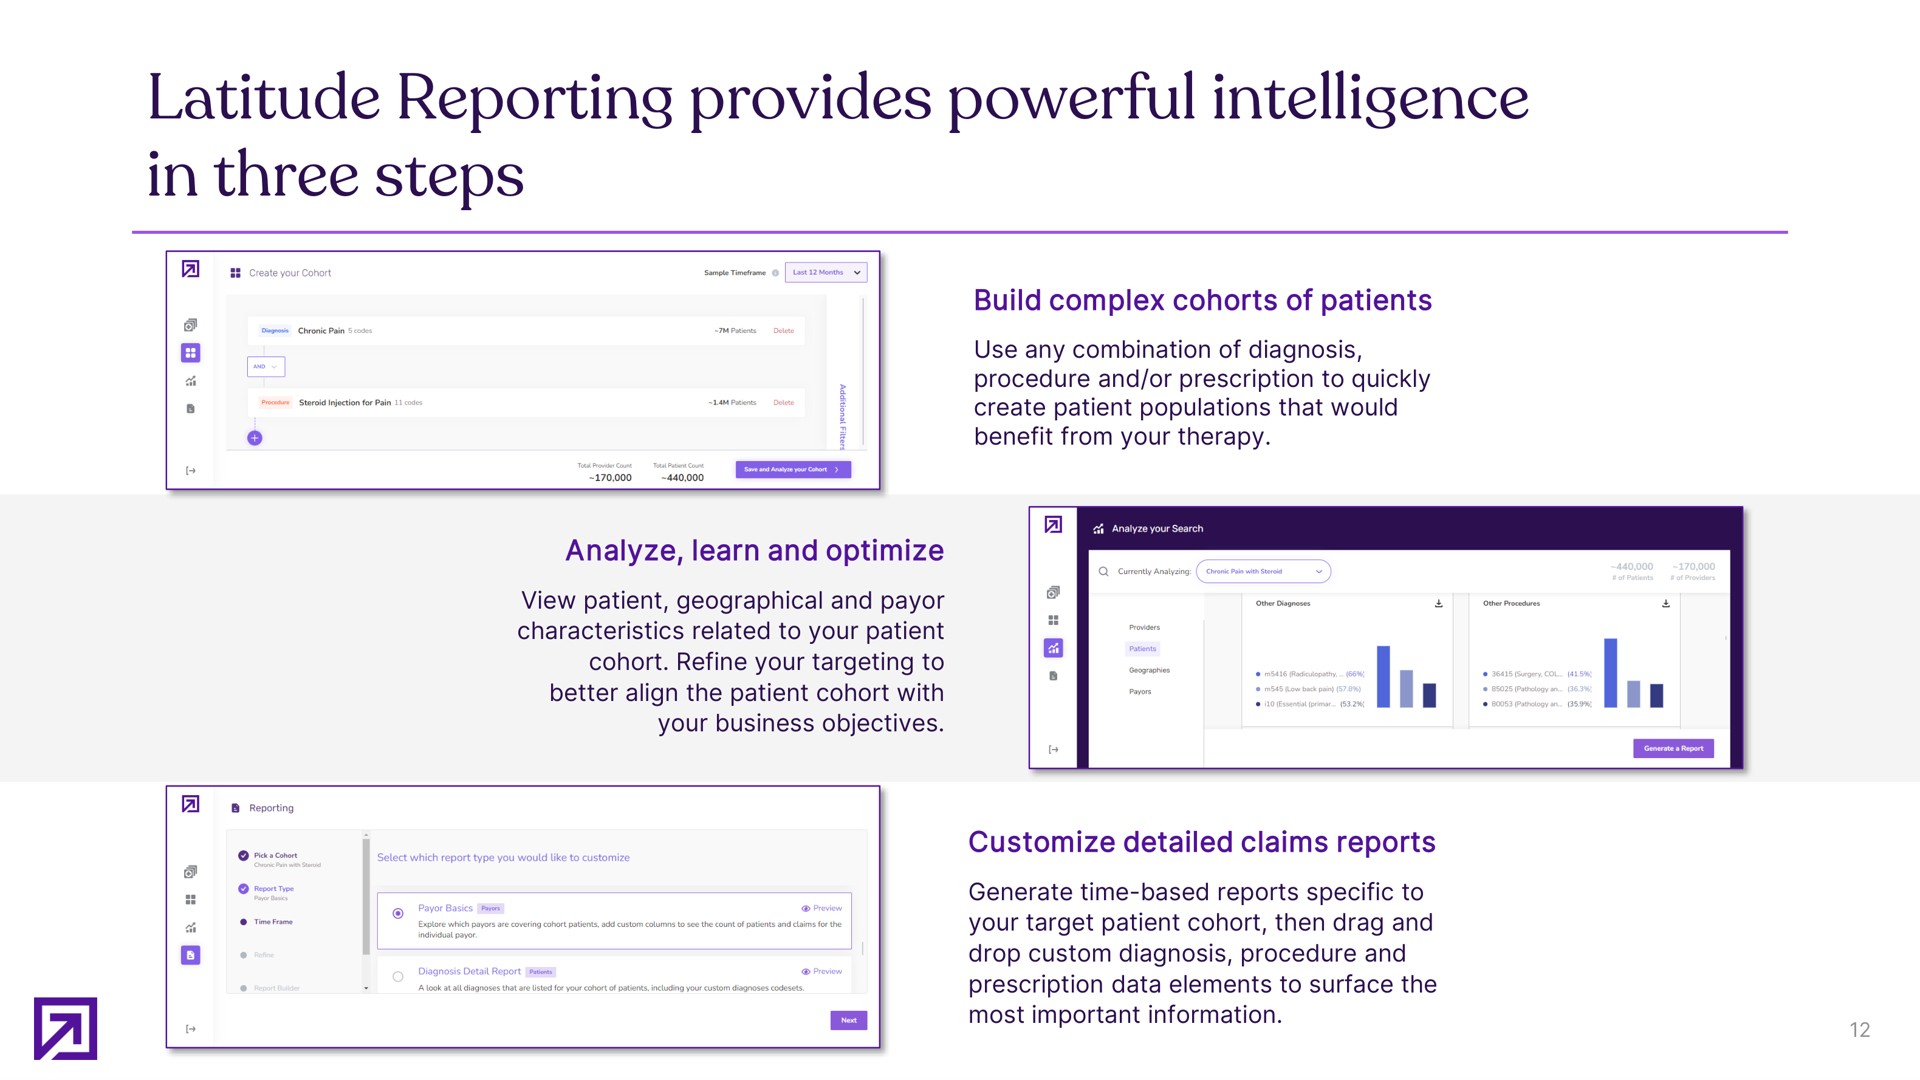 latitude reporting provides powerful intelligence in three steps | Definitive Healthcare